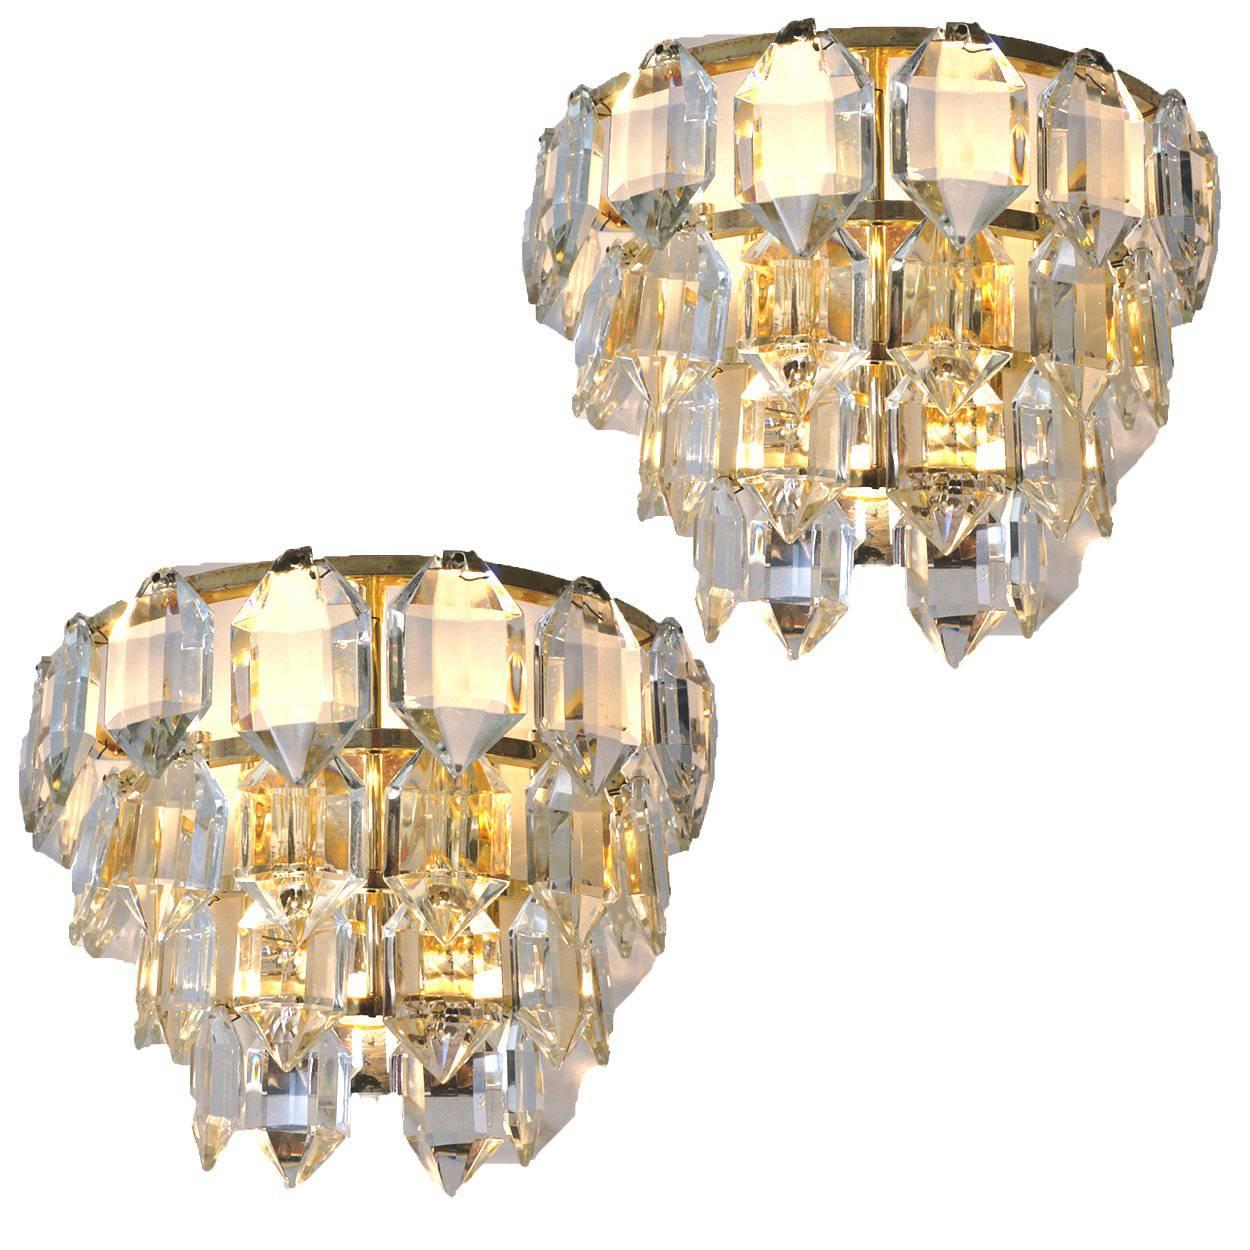 Beautiful, elegant pair of brass and crystal midcentury wall lights by Bakalowits, Austria, circa 1960s.
Polished brass frame and gem-like crystals. The crystals are meticulously cut in such a way that radiate the light of the bulbs in different